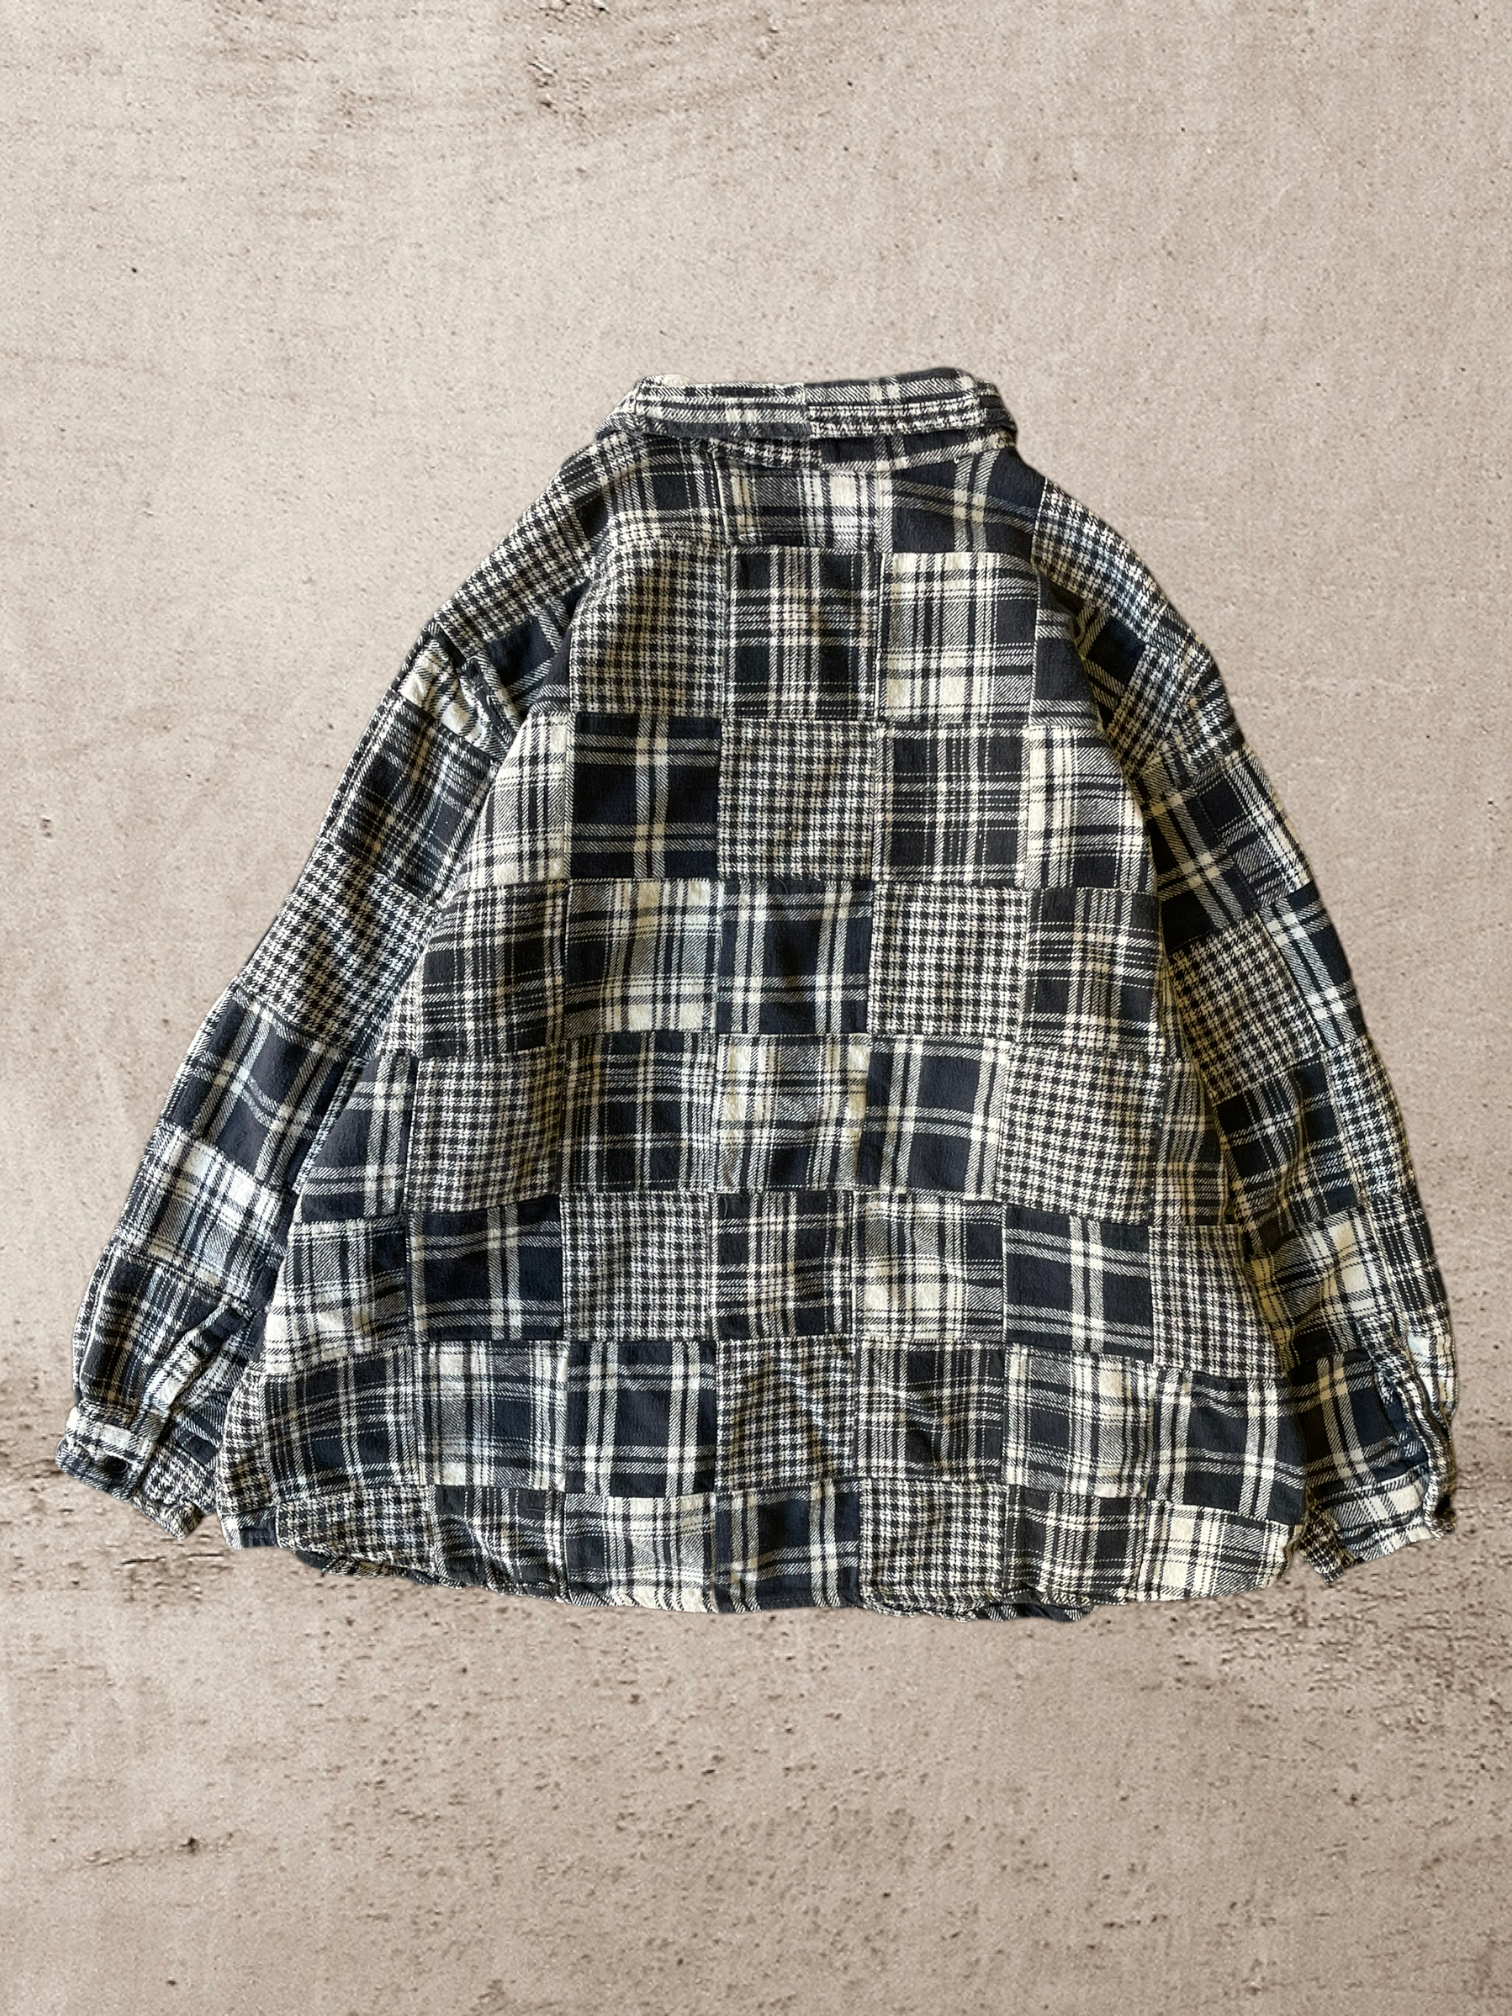 90s Patchwork Cut n Sew Flannel - X-Large